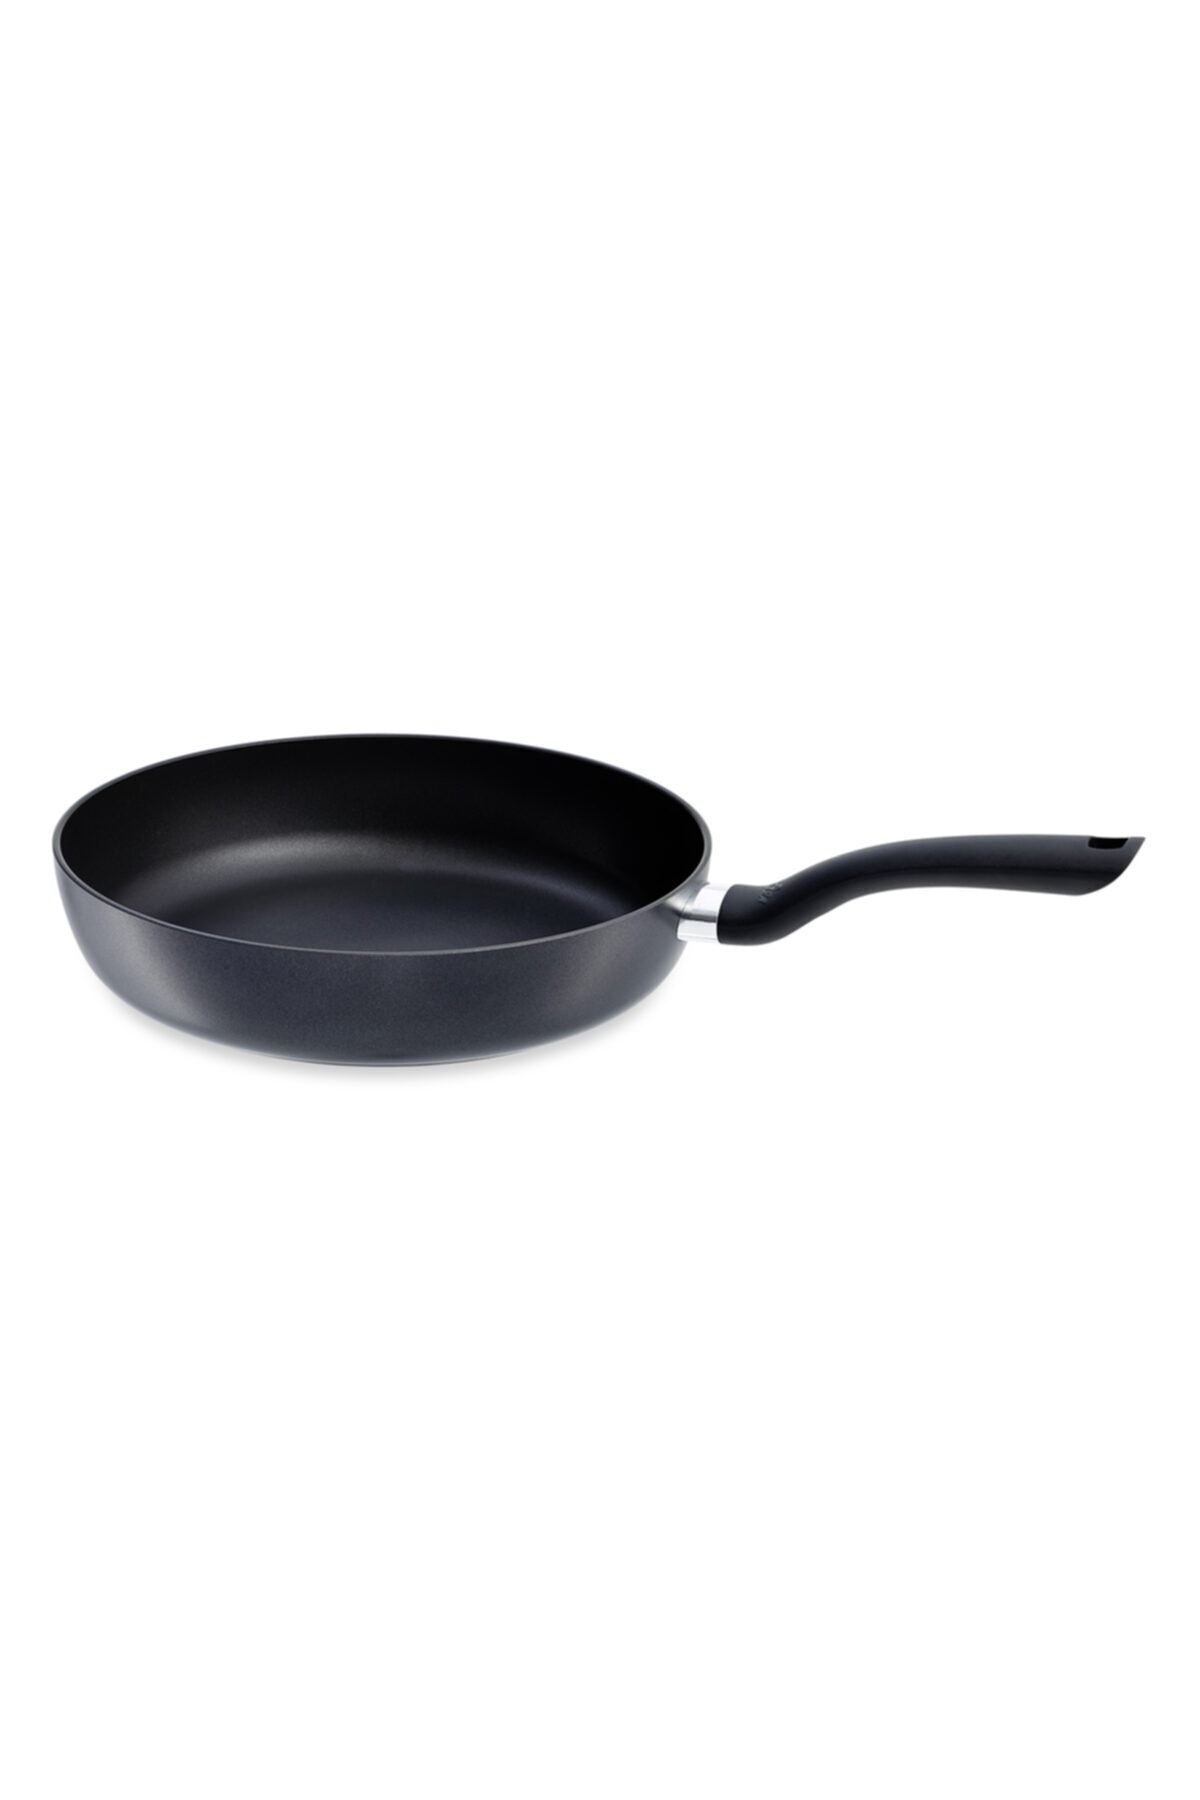 Fissler Cenit Pan Tava 24 Cm Without Induction